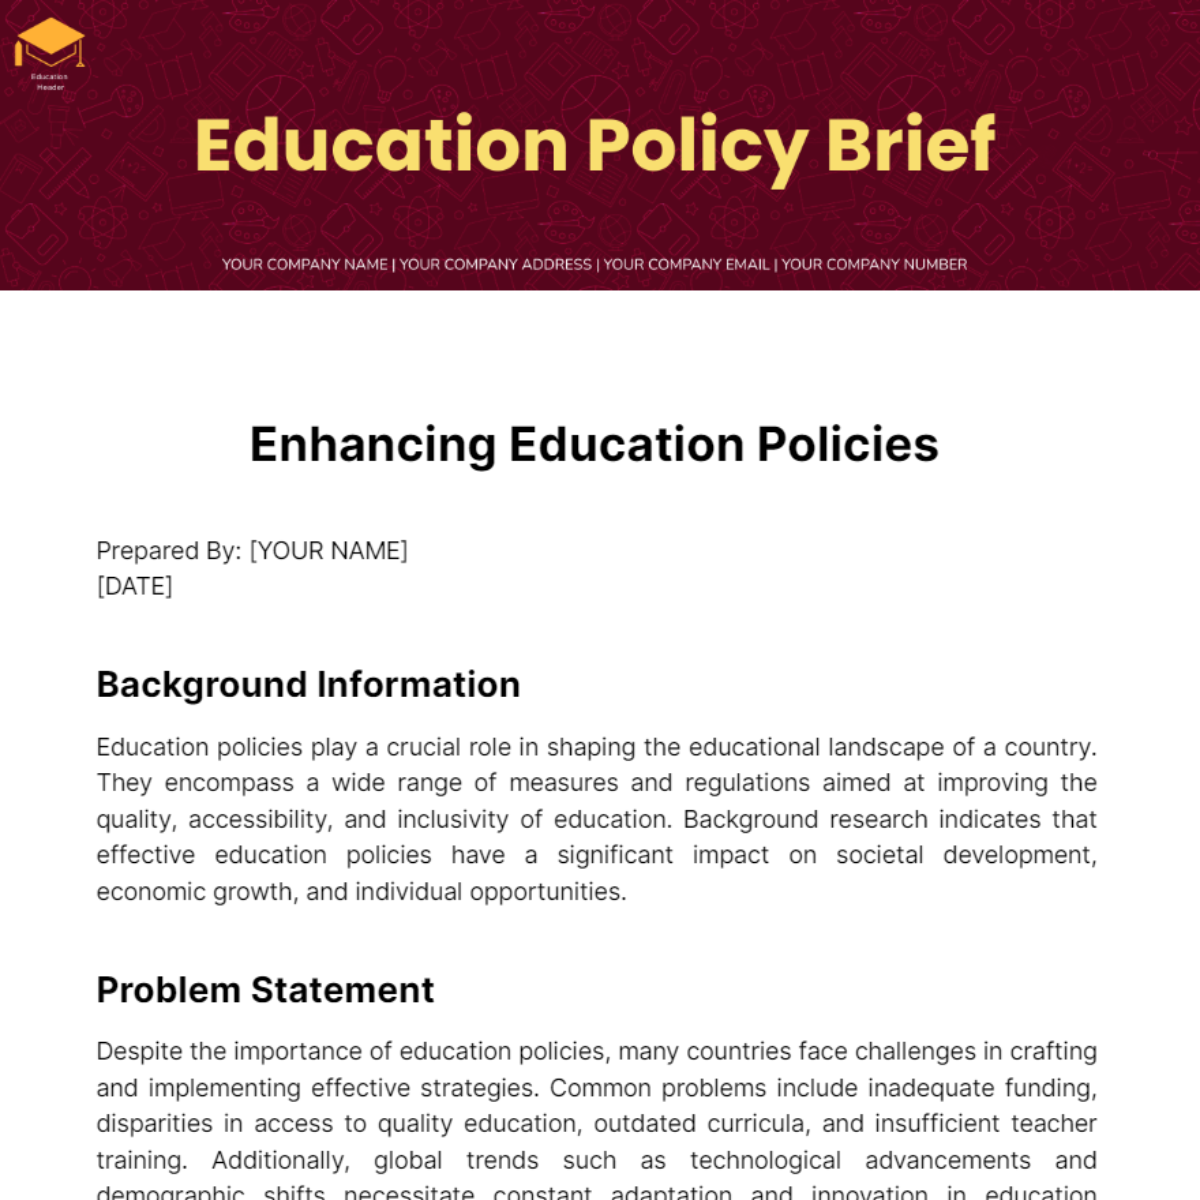 Education Policy Brief Template